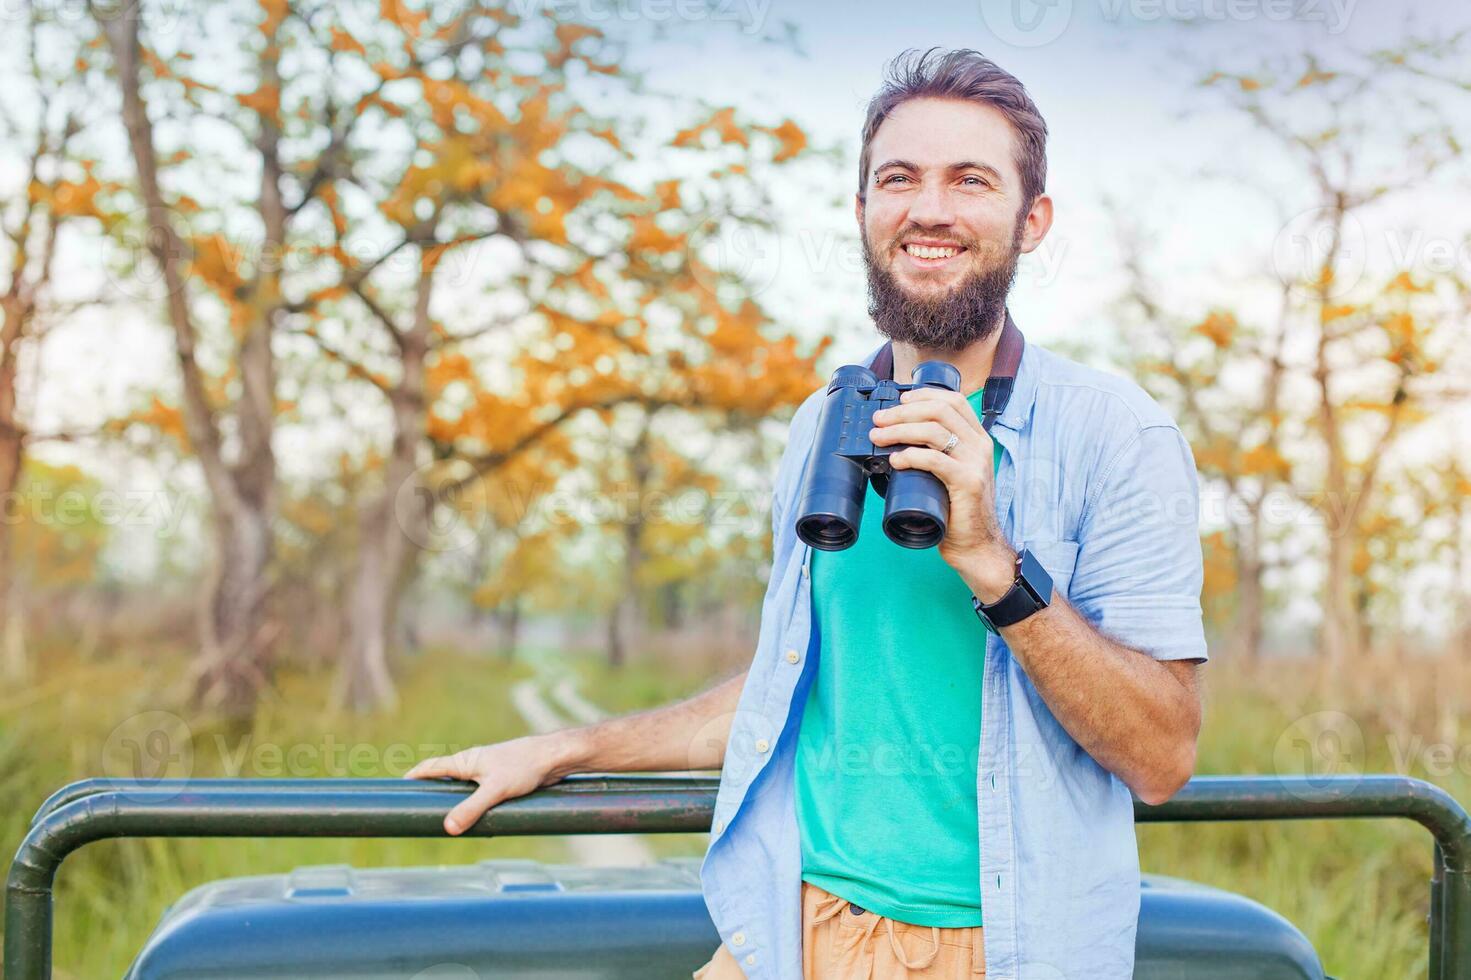 a man with a beard and a green shirt is holding binoculars photo